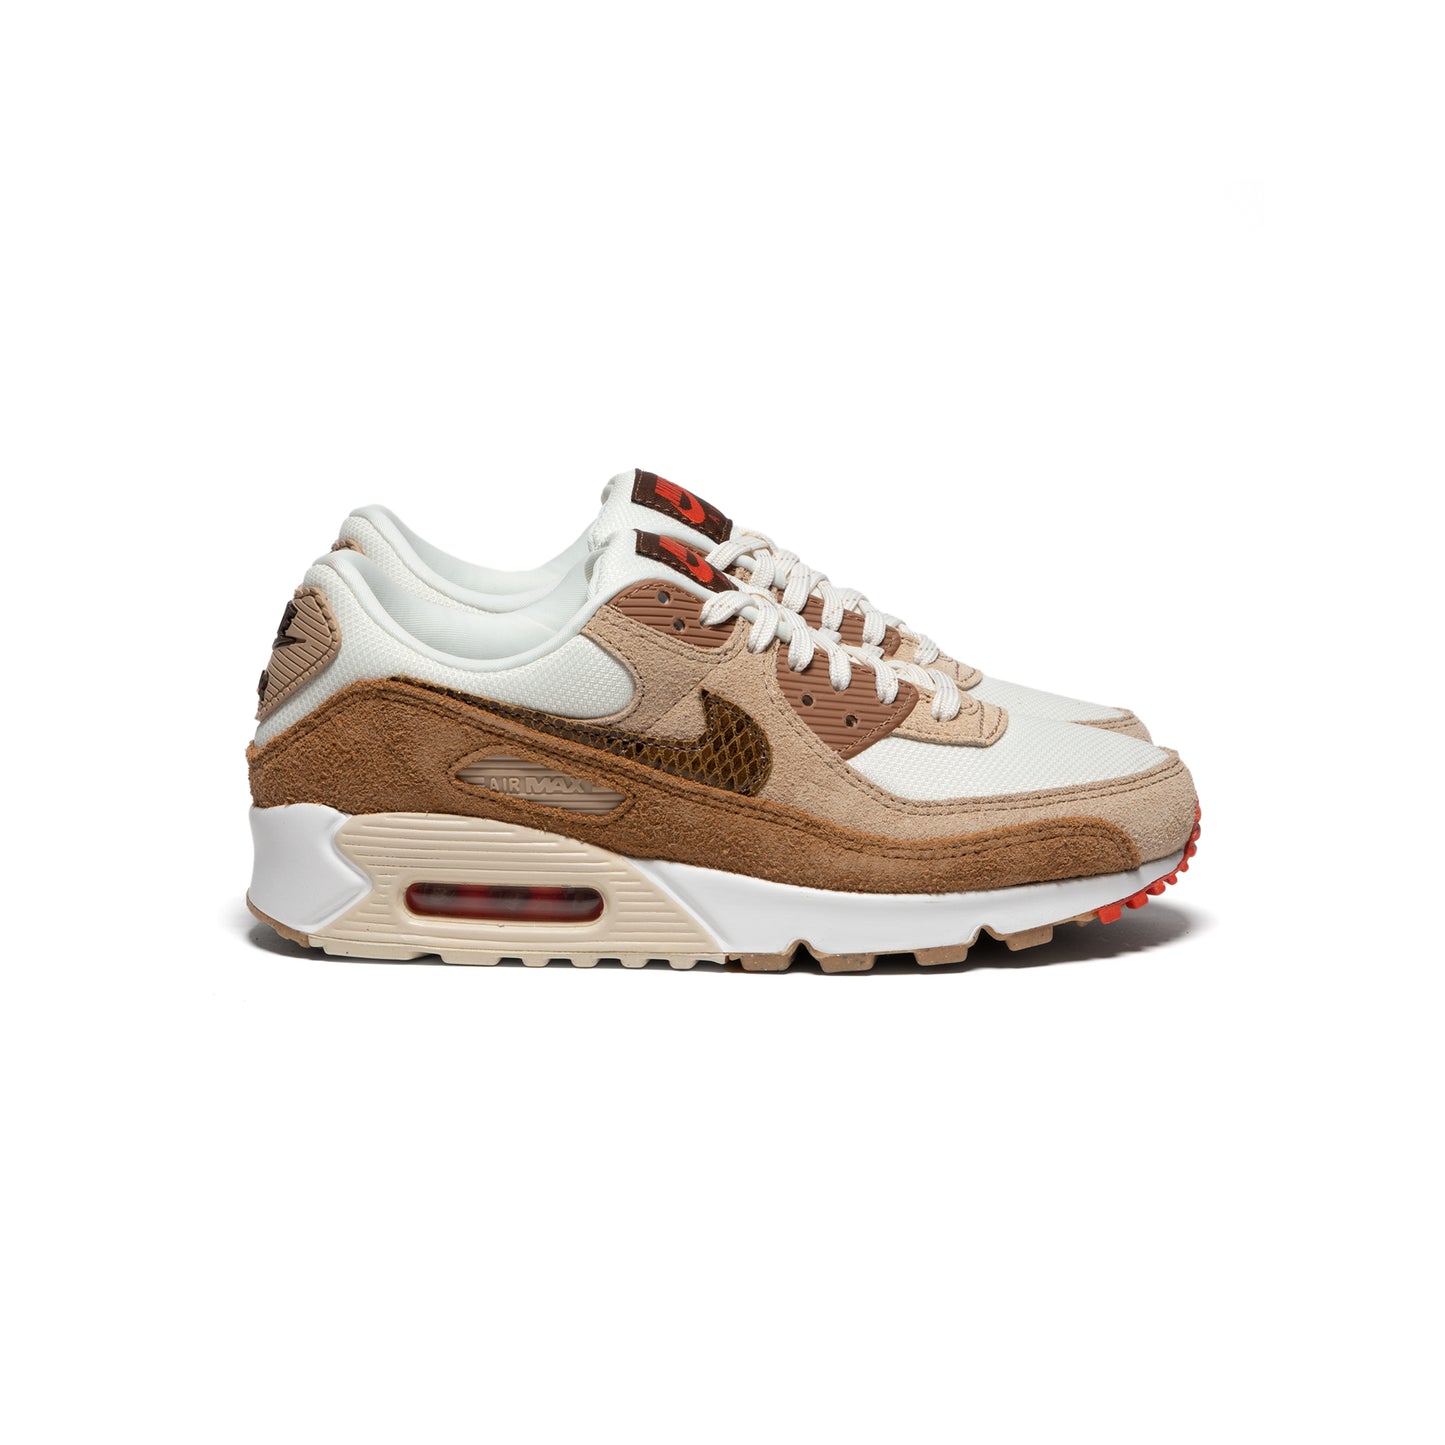 Nike Womens Air Max 90 SE (Pale Ivory/Picante Red/Summit White)